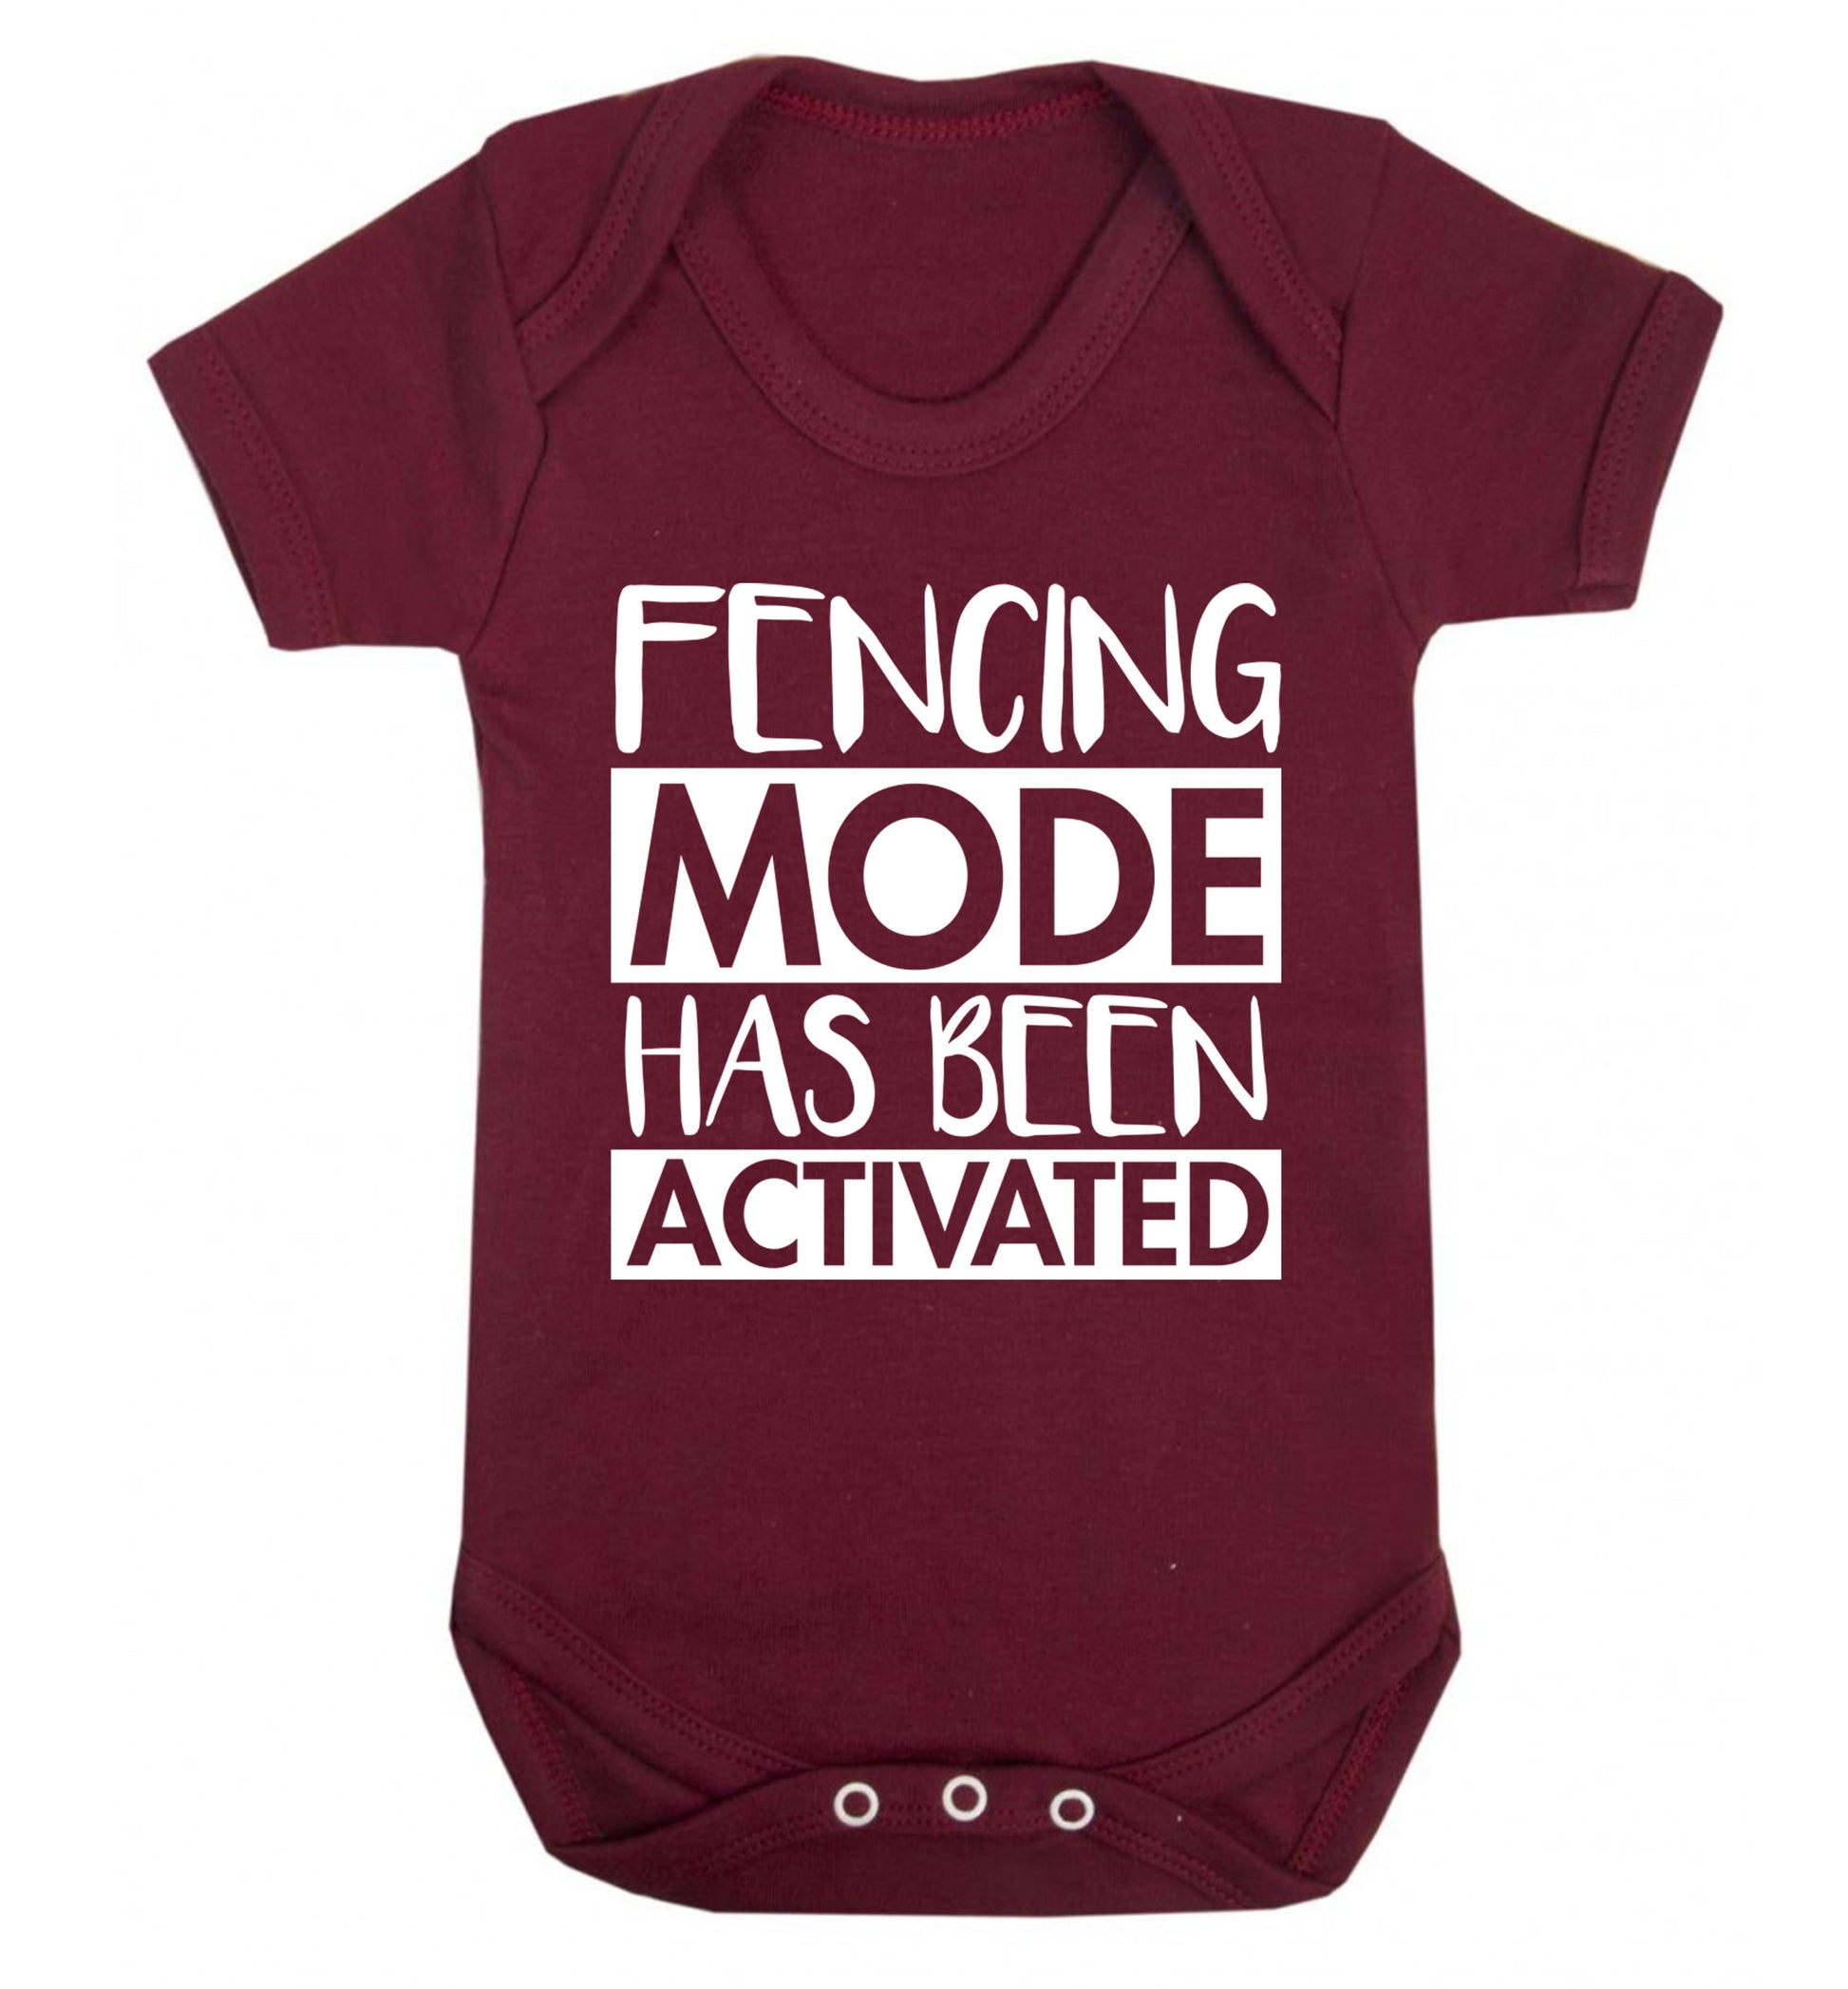 Fencing mode activated Baby Vest maroon 18-24 months